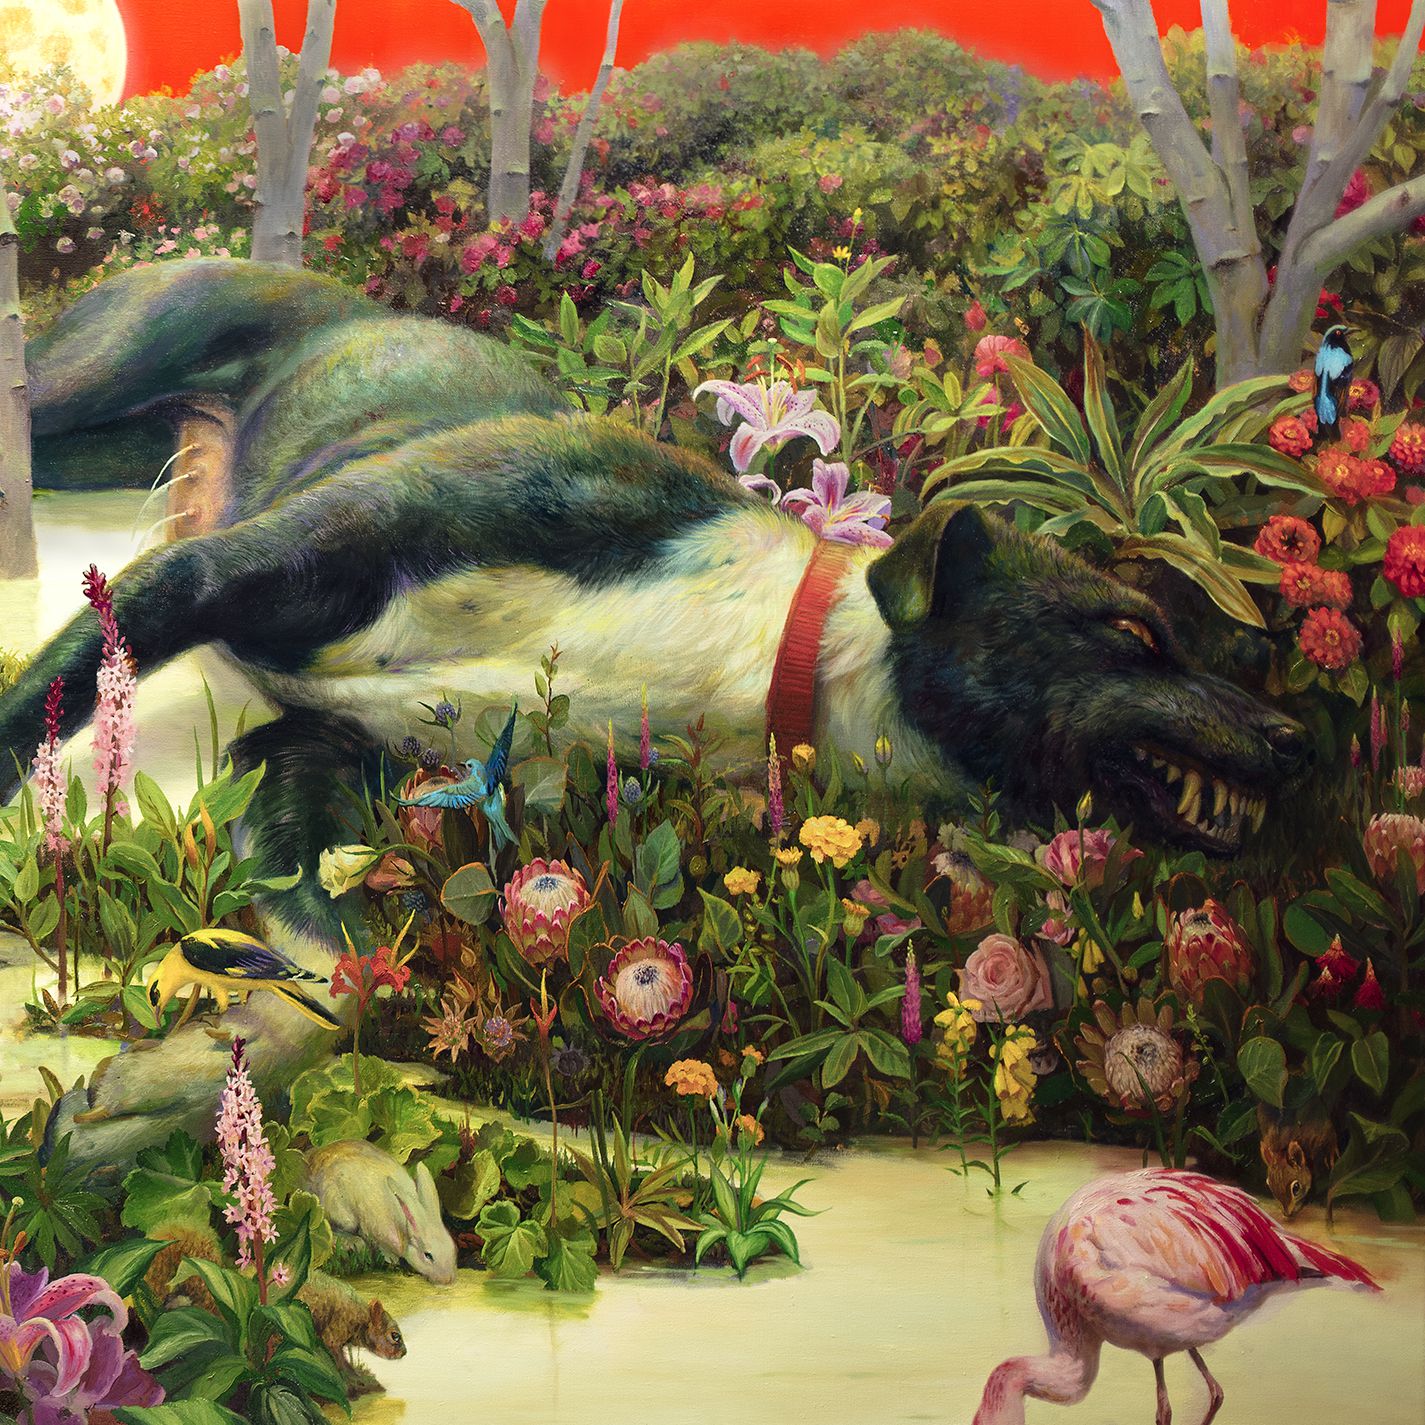 Rival Sons announce new North American tour dates